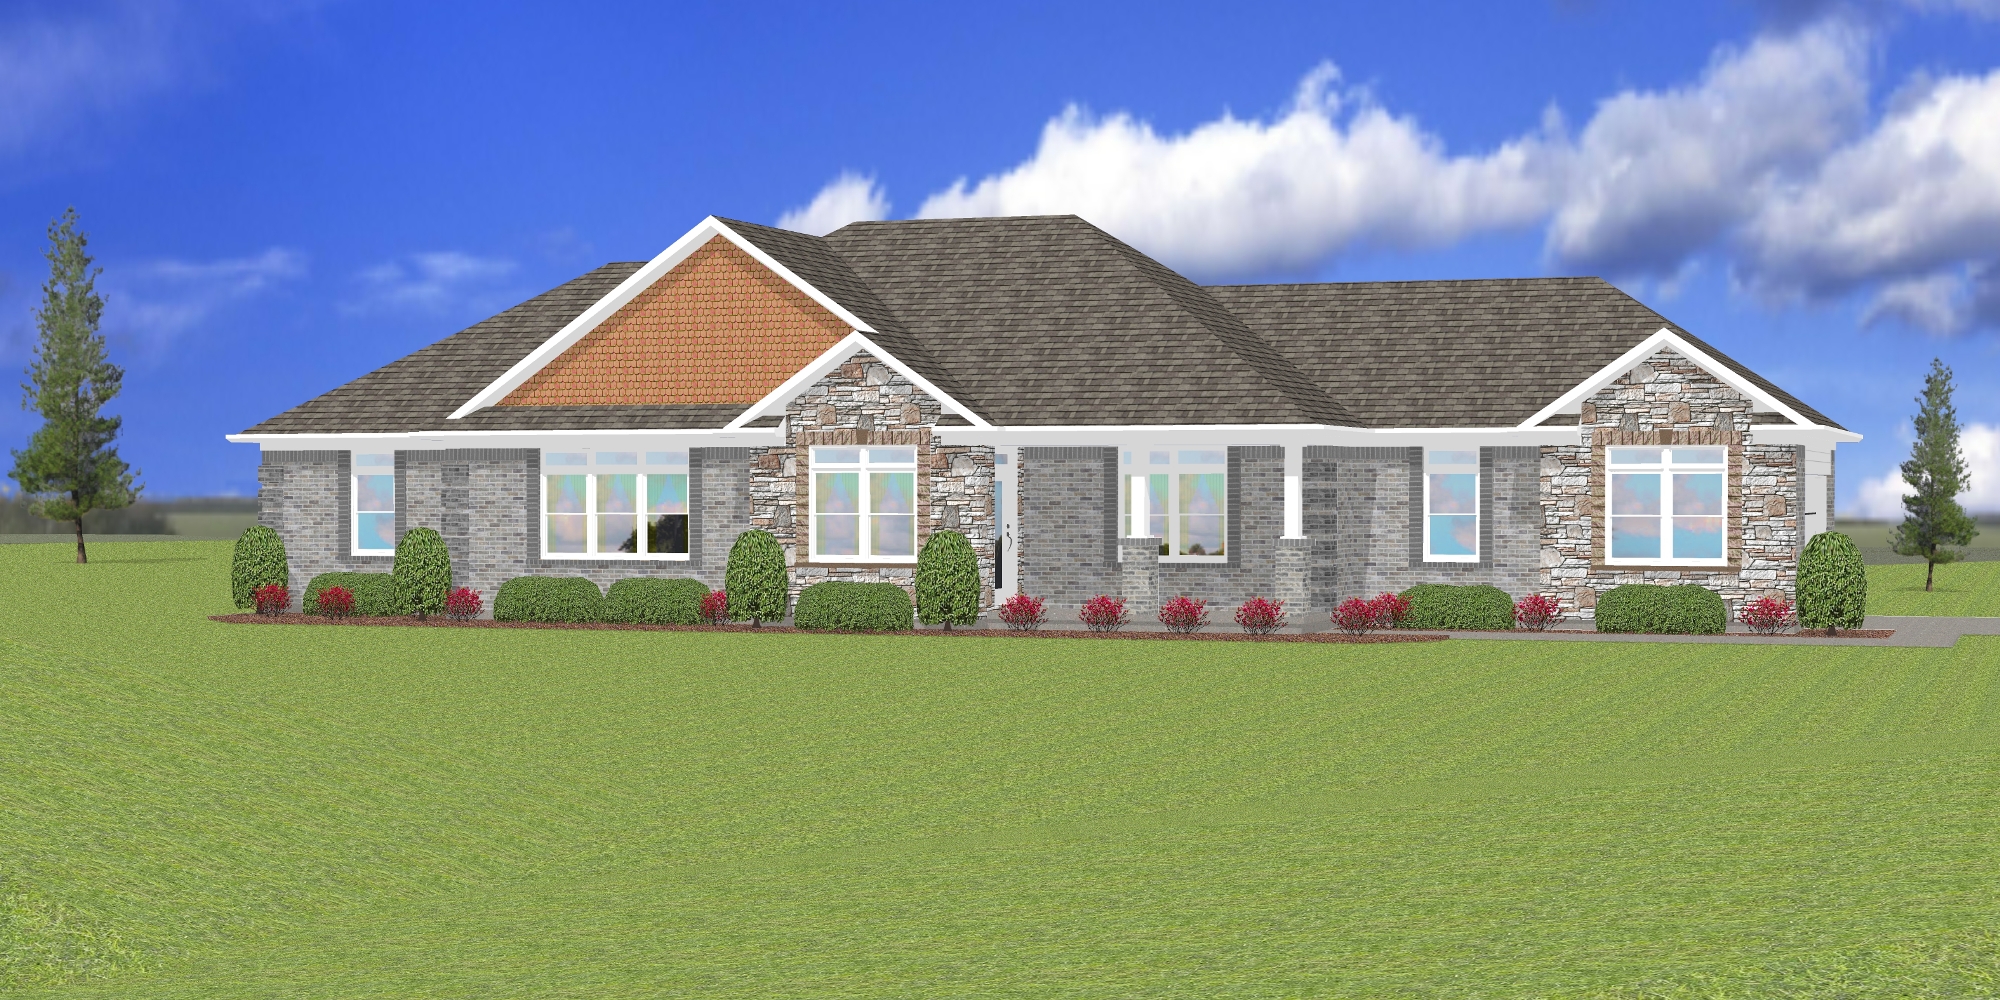 Featured Home Design | The Brownsboro 187 With New Background 2000 X 1000